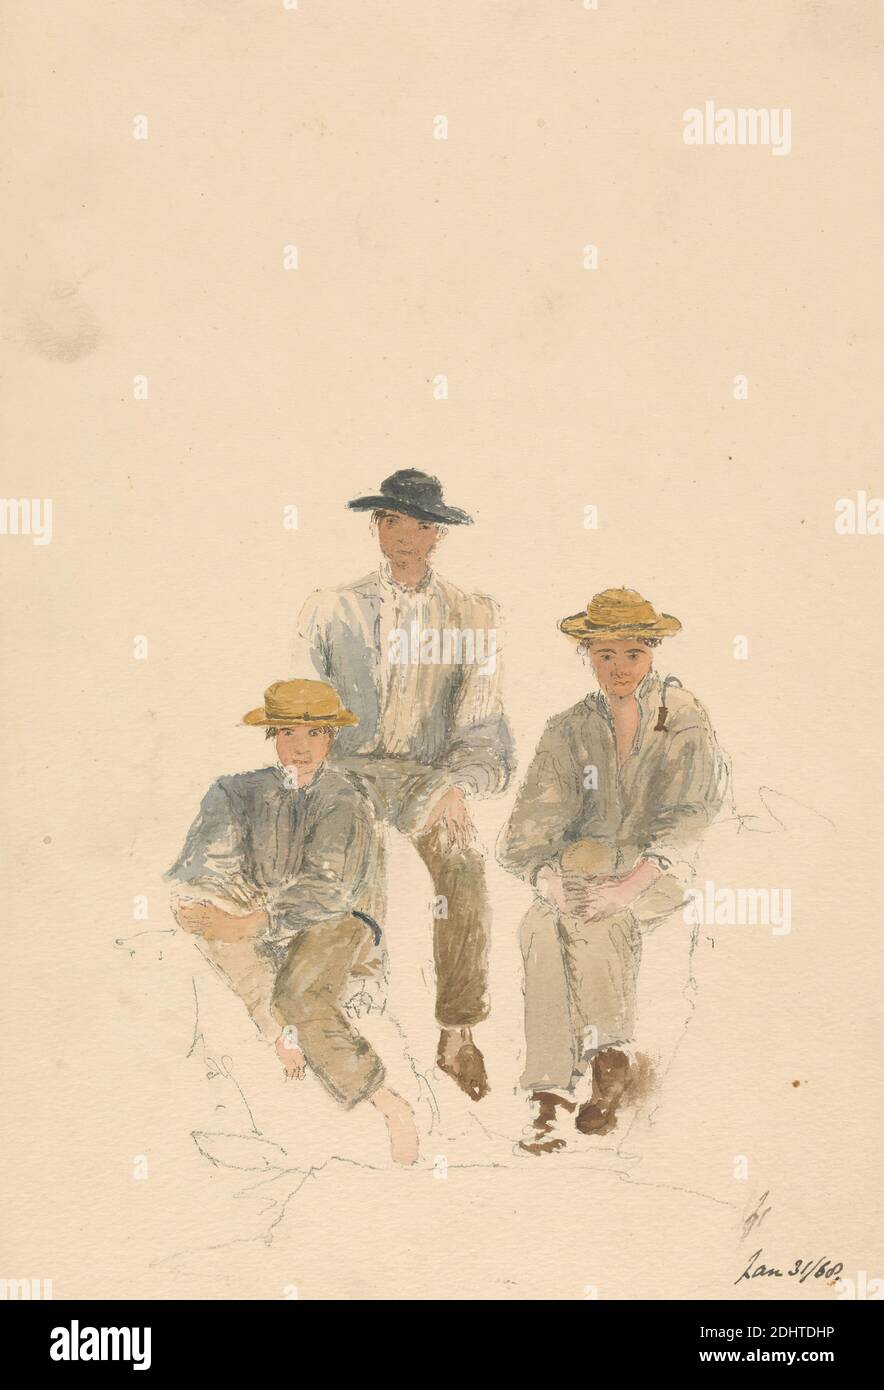 Three Men (Jan 31/68), unknown artist, nineteenth century, 1868, Watercolor and graphite on thick, moderately textured, cream wove paper, Sheet: 10 × 7 inches (25.4 × 17.8 cm), figure study, hats, men Stock Photo